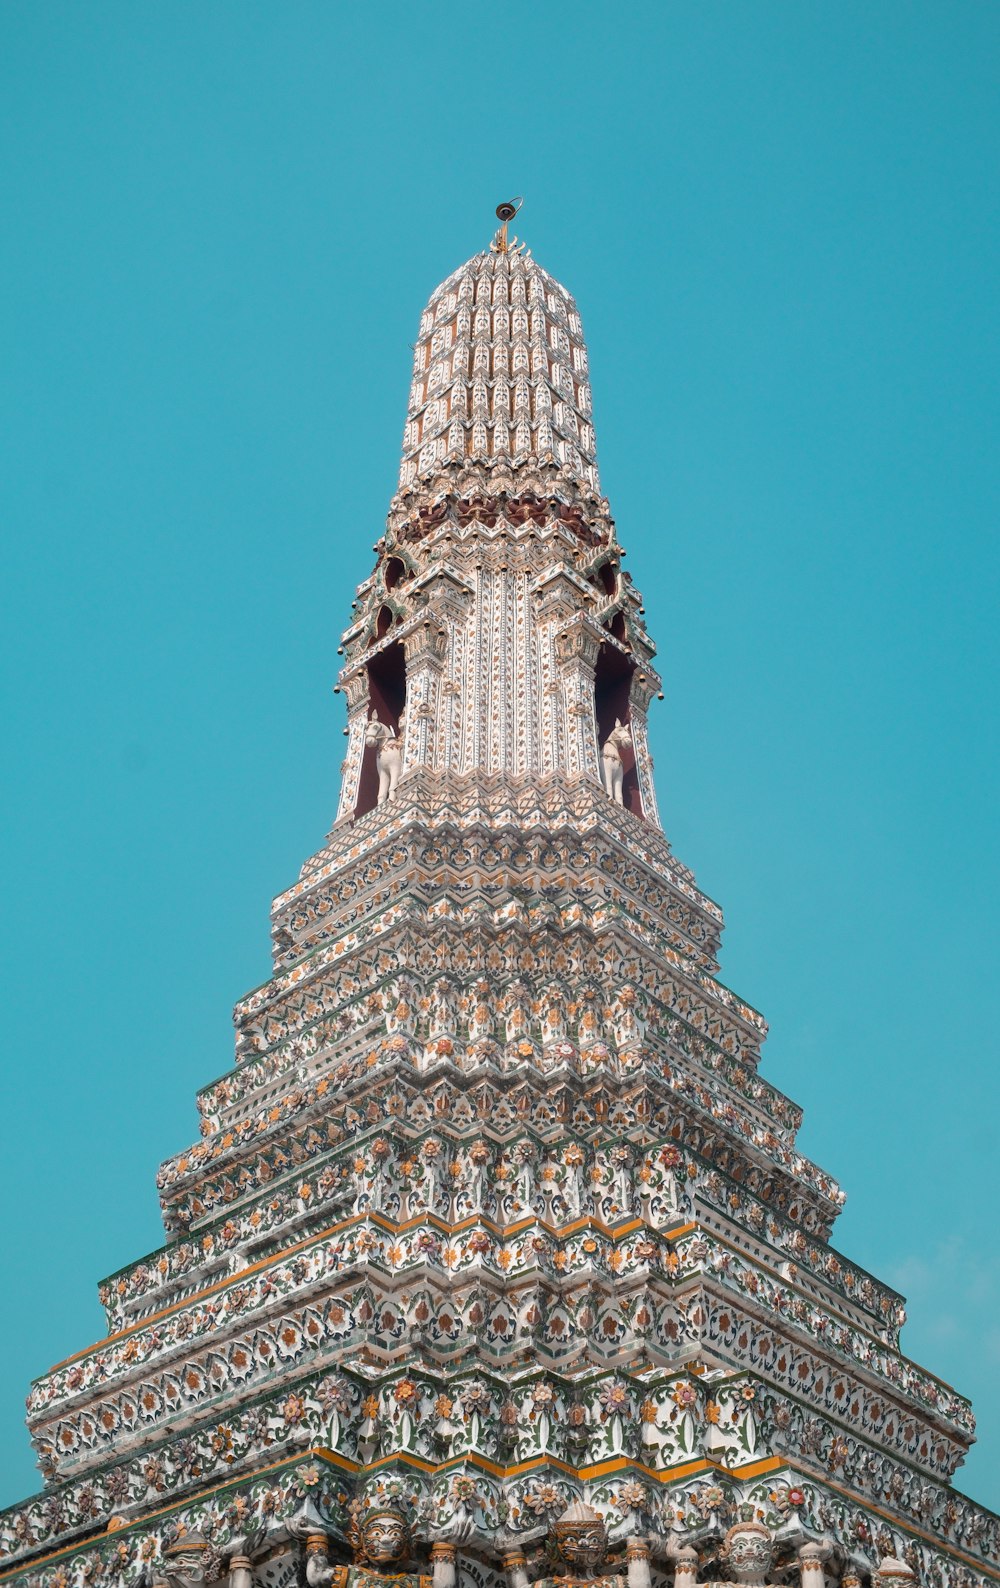 a tall ornate tower